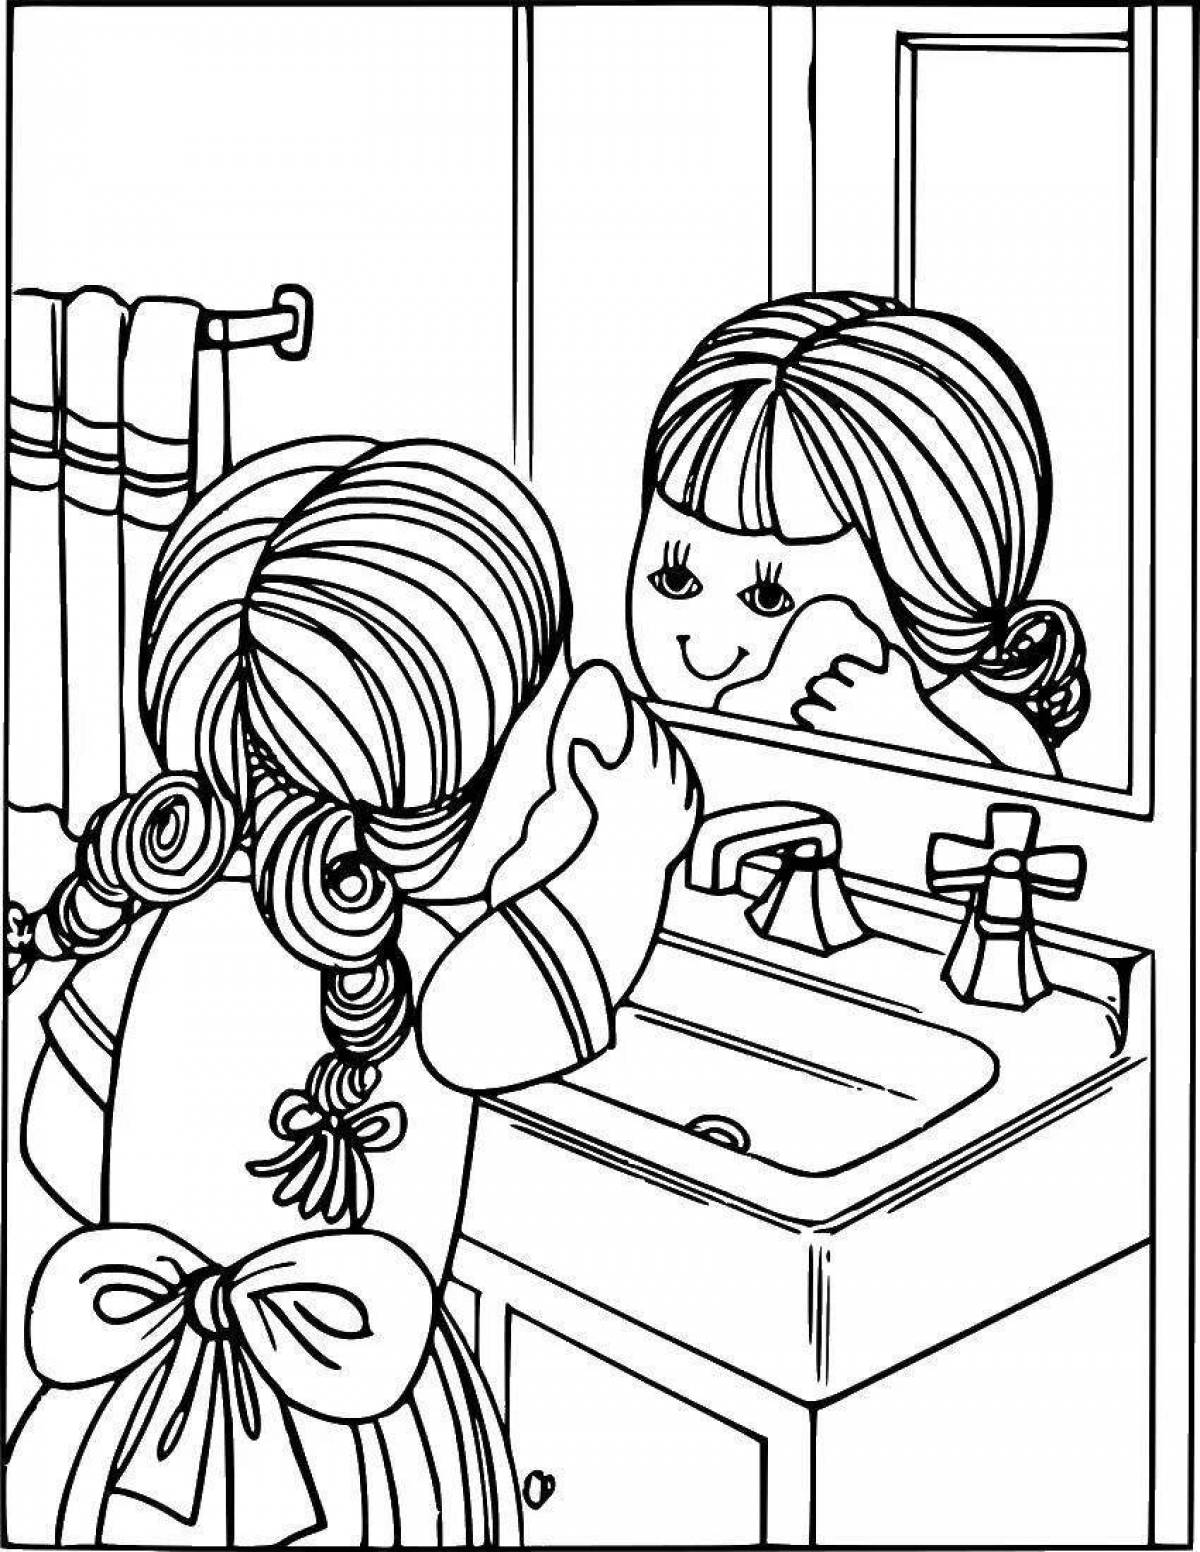 Coloring book sparkling I wash my face